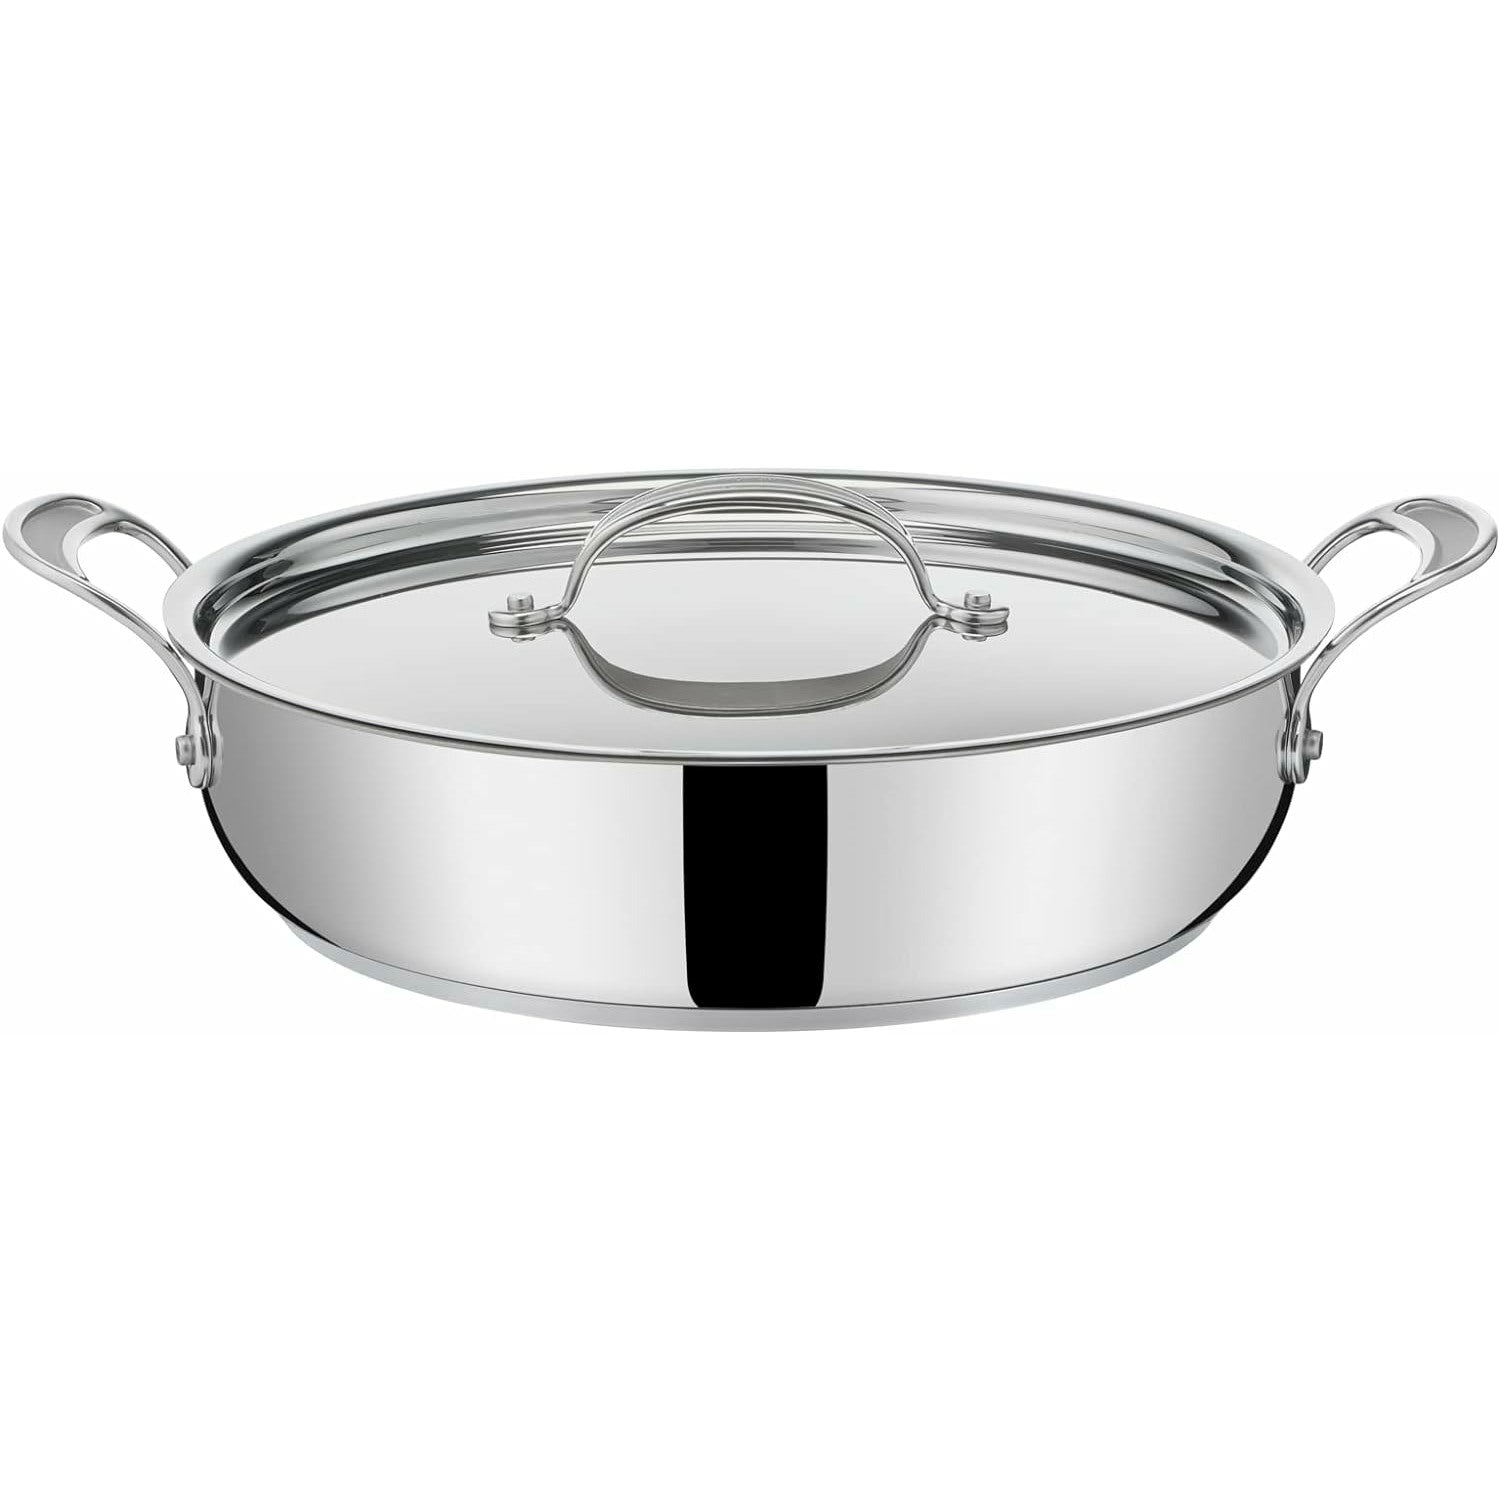 Tefal Jamie Oliver Cook's Classics Stainless Steel Shallow Pot, 30 cm,